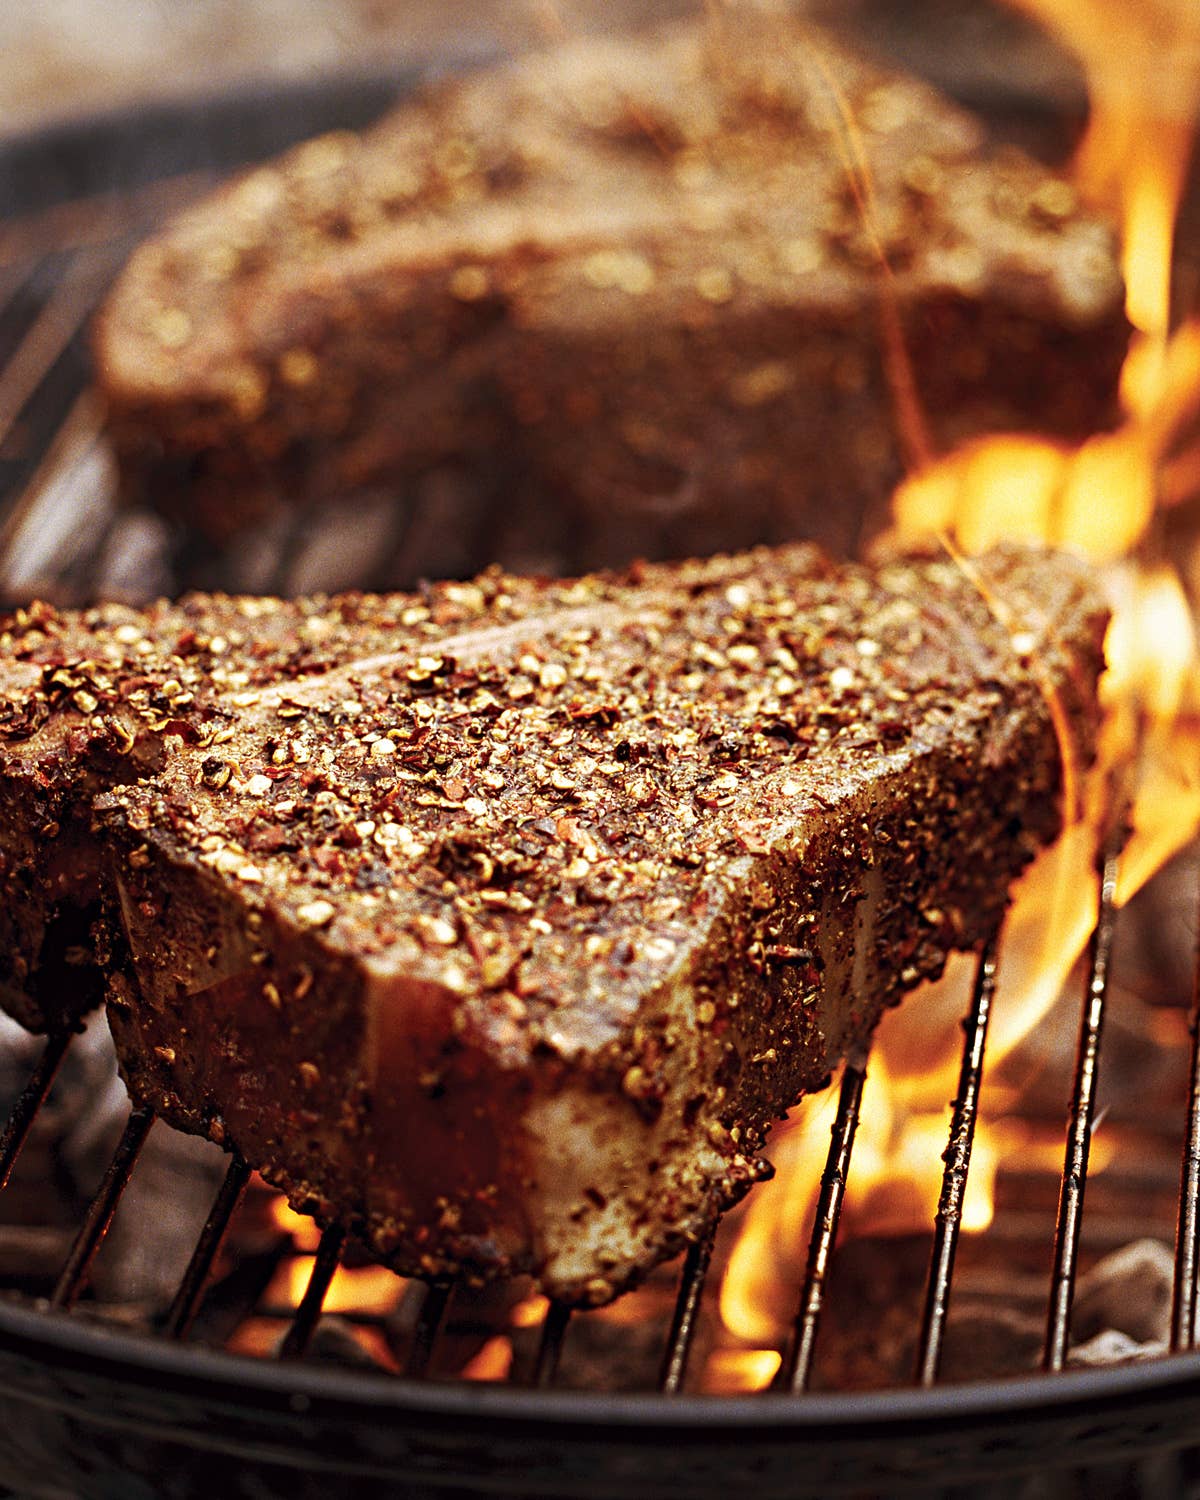 10 Essential Spice Rubs for Your Grill and Roasts